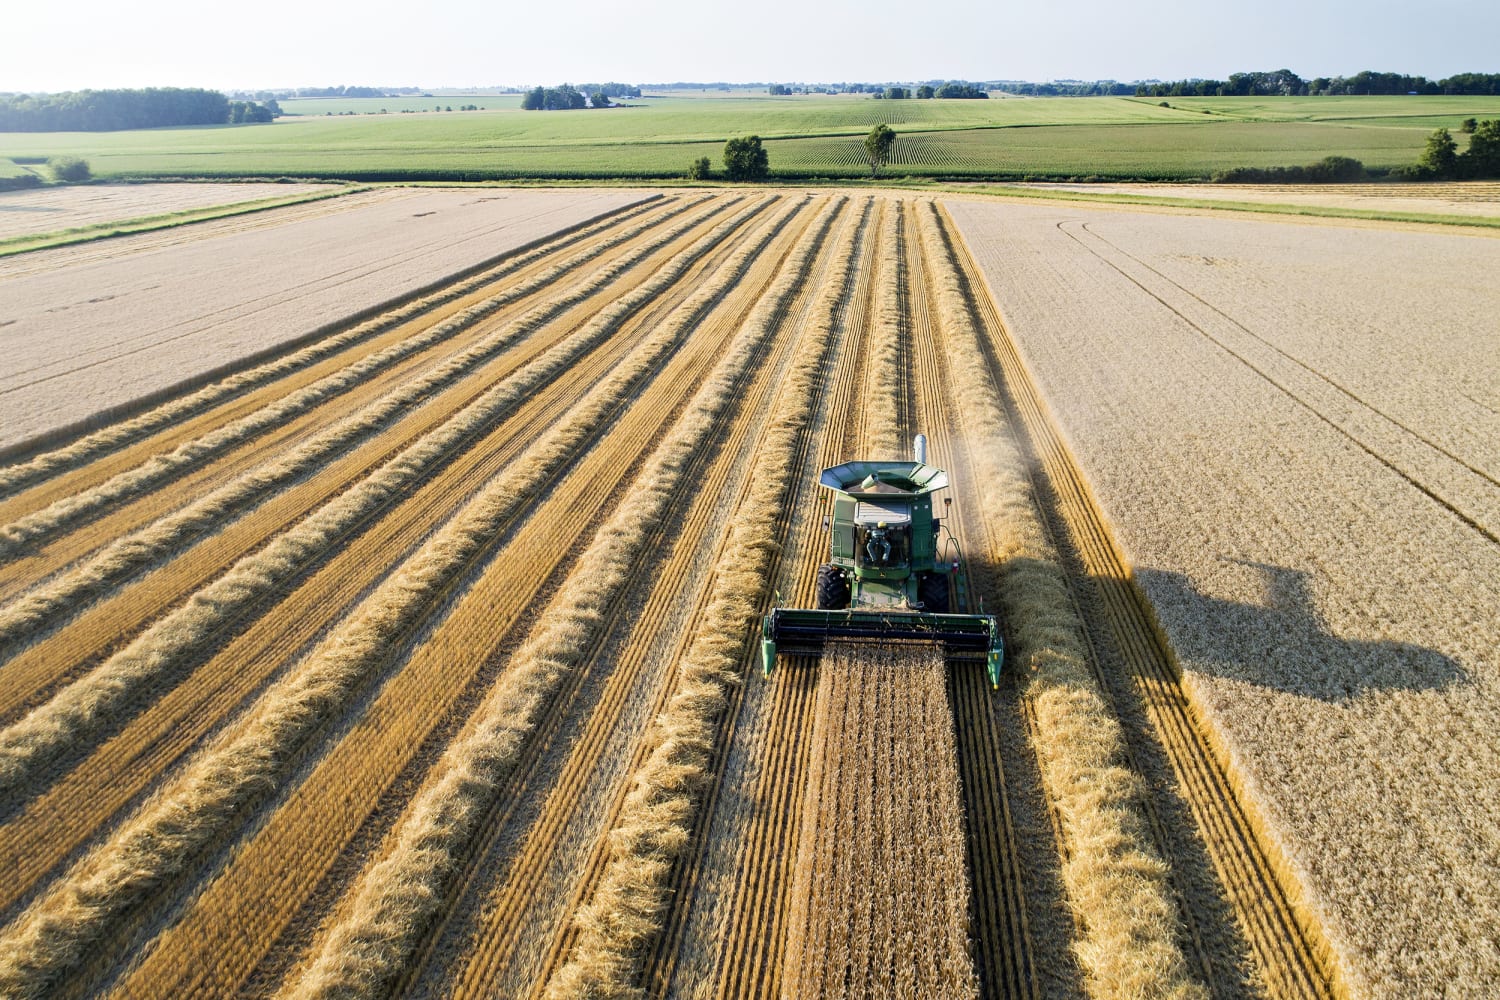 Supply chain shortages made farm equipment scarce. Could the John Deere strike make things worse?